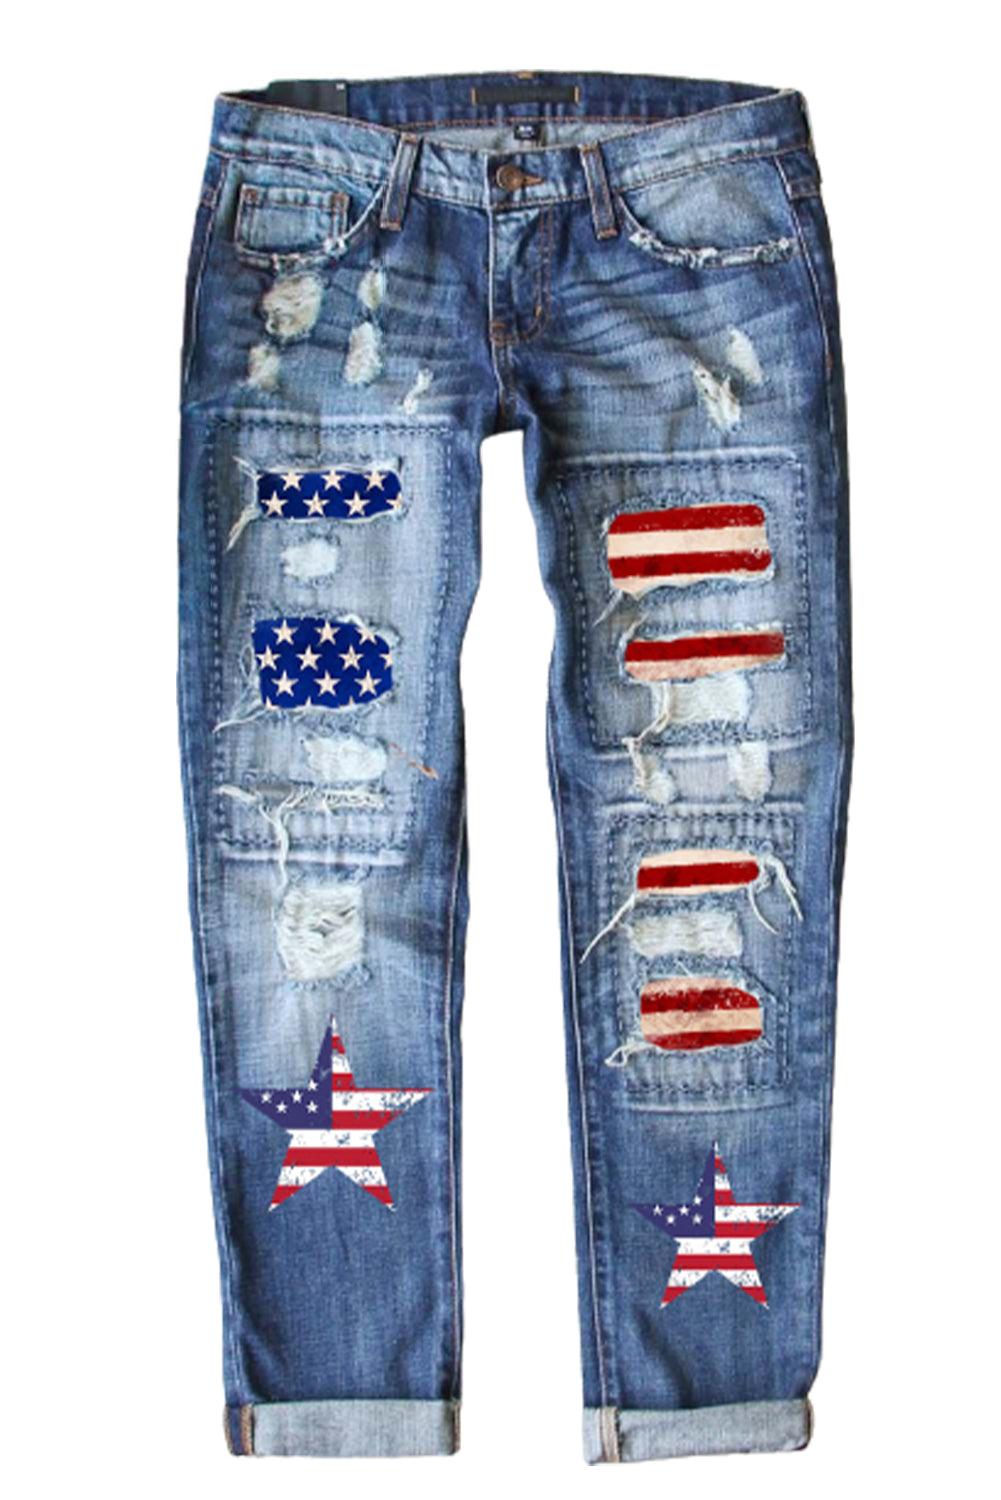 Sky Blue American Flag Graphic Jean Pockets Distressed Denim Pants for Women LC787845-4